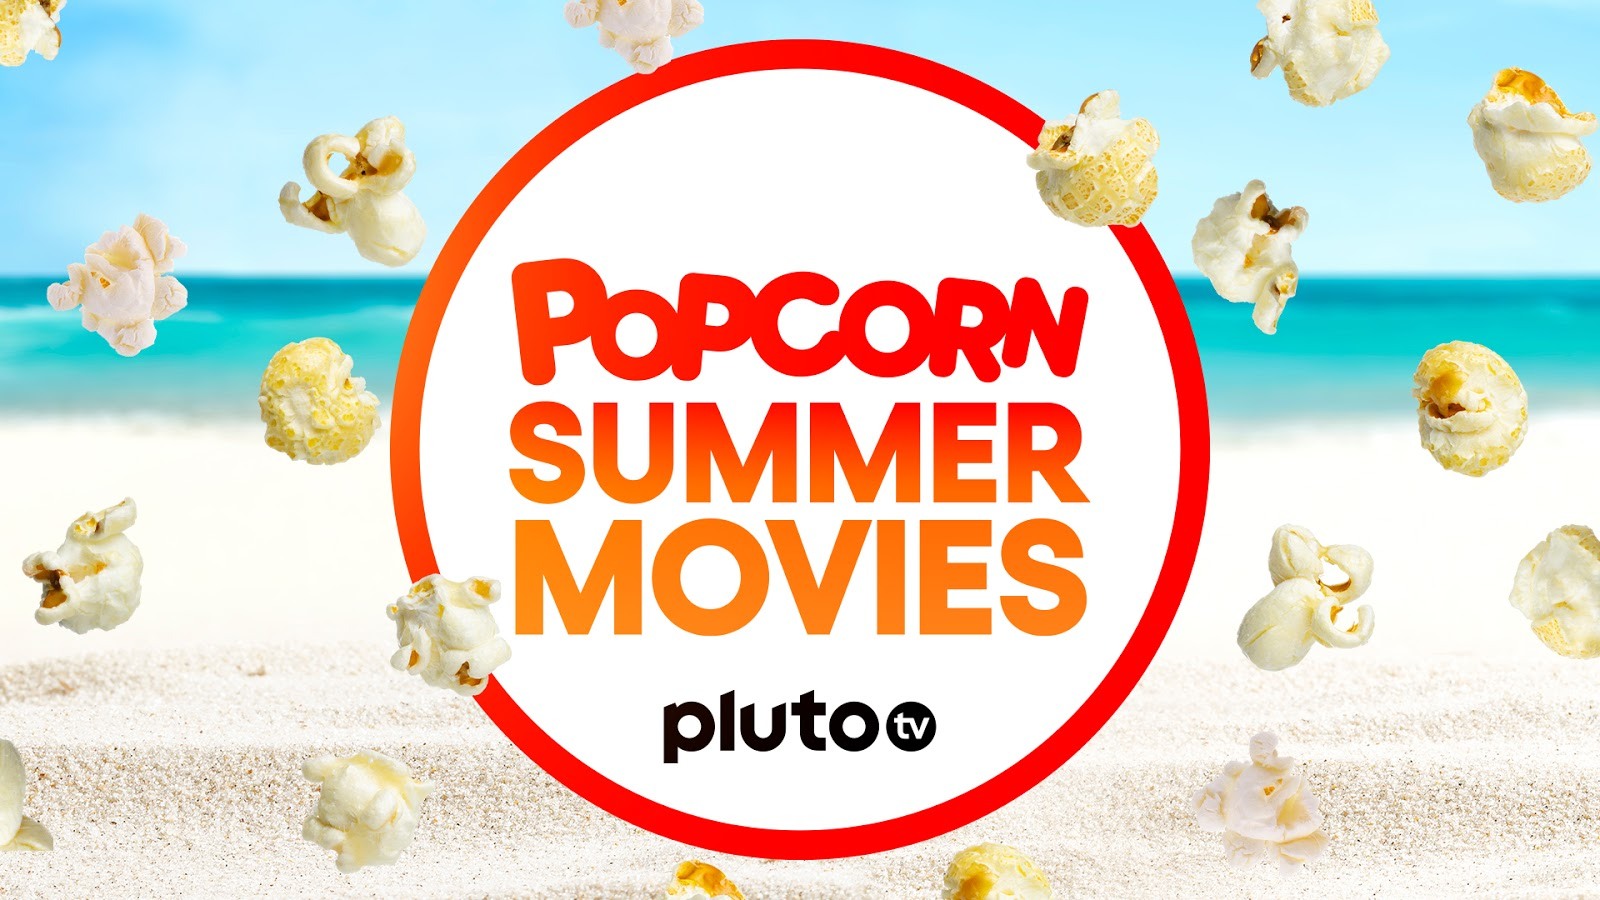 Pluto TV is Adding Over 80 Movies in August: Here’s the Full List